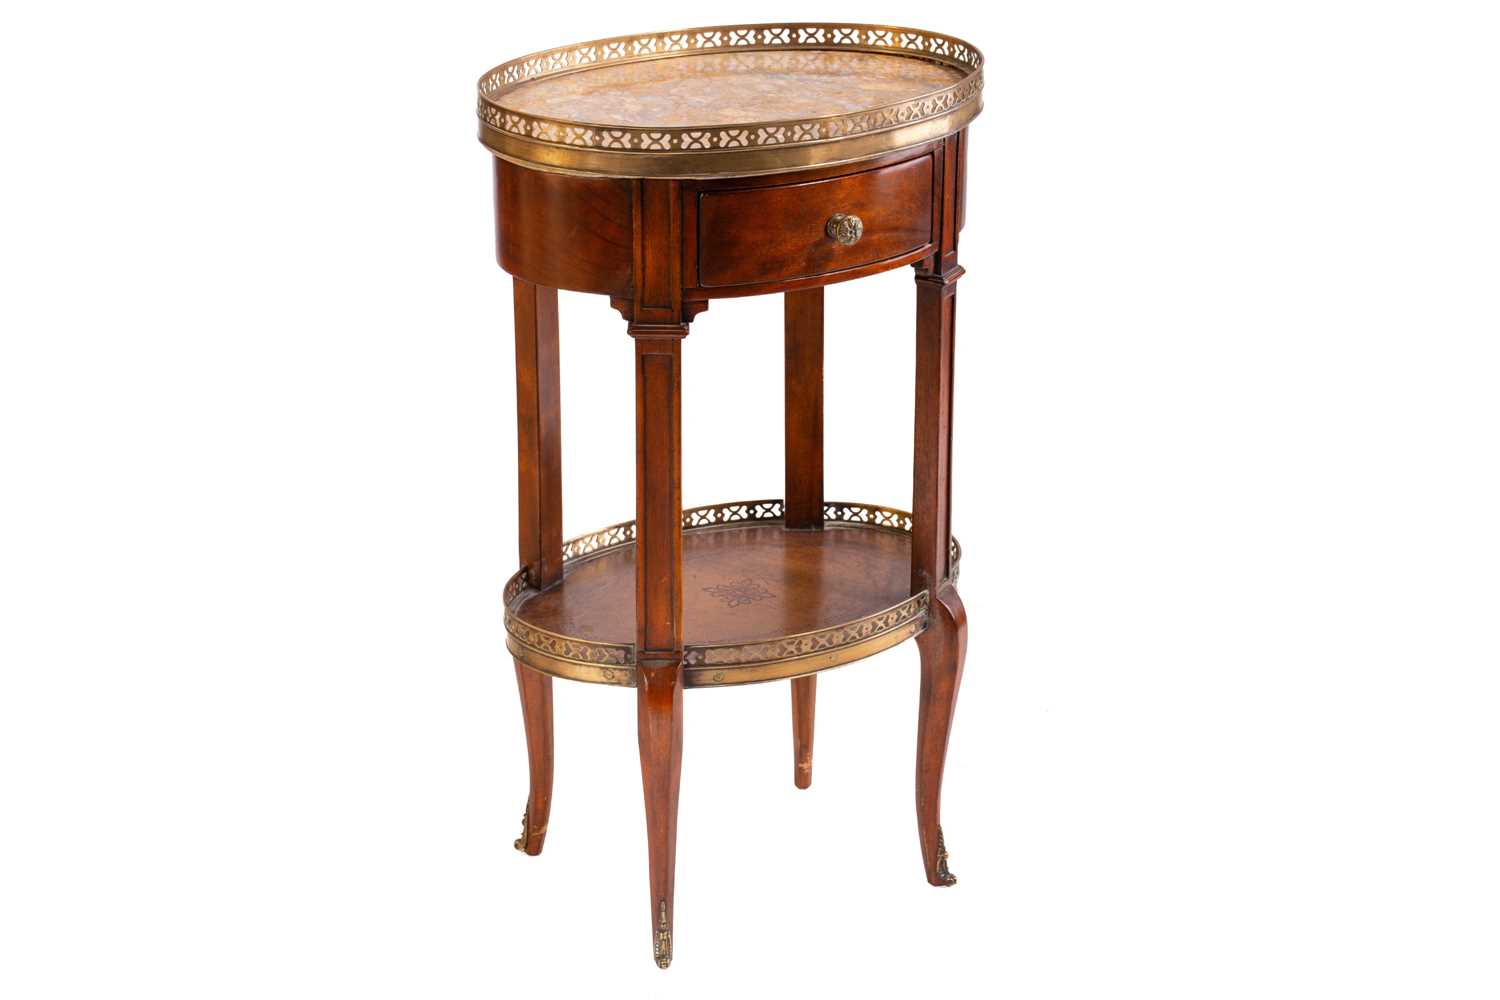 A French Napoleon III style mahogany oval table en chiffonier with marble top, 20th century, with